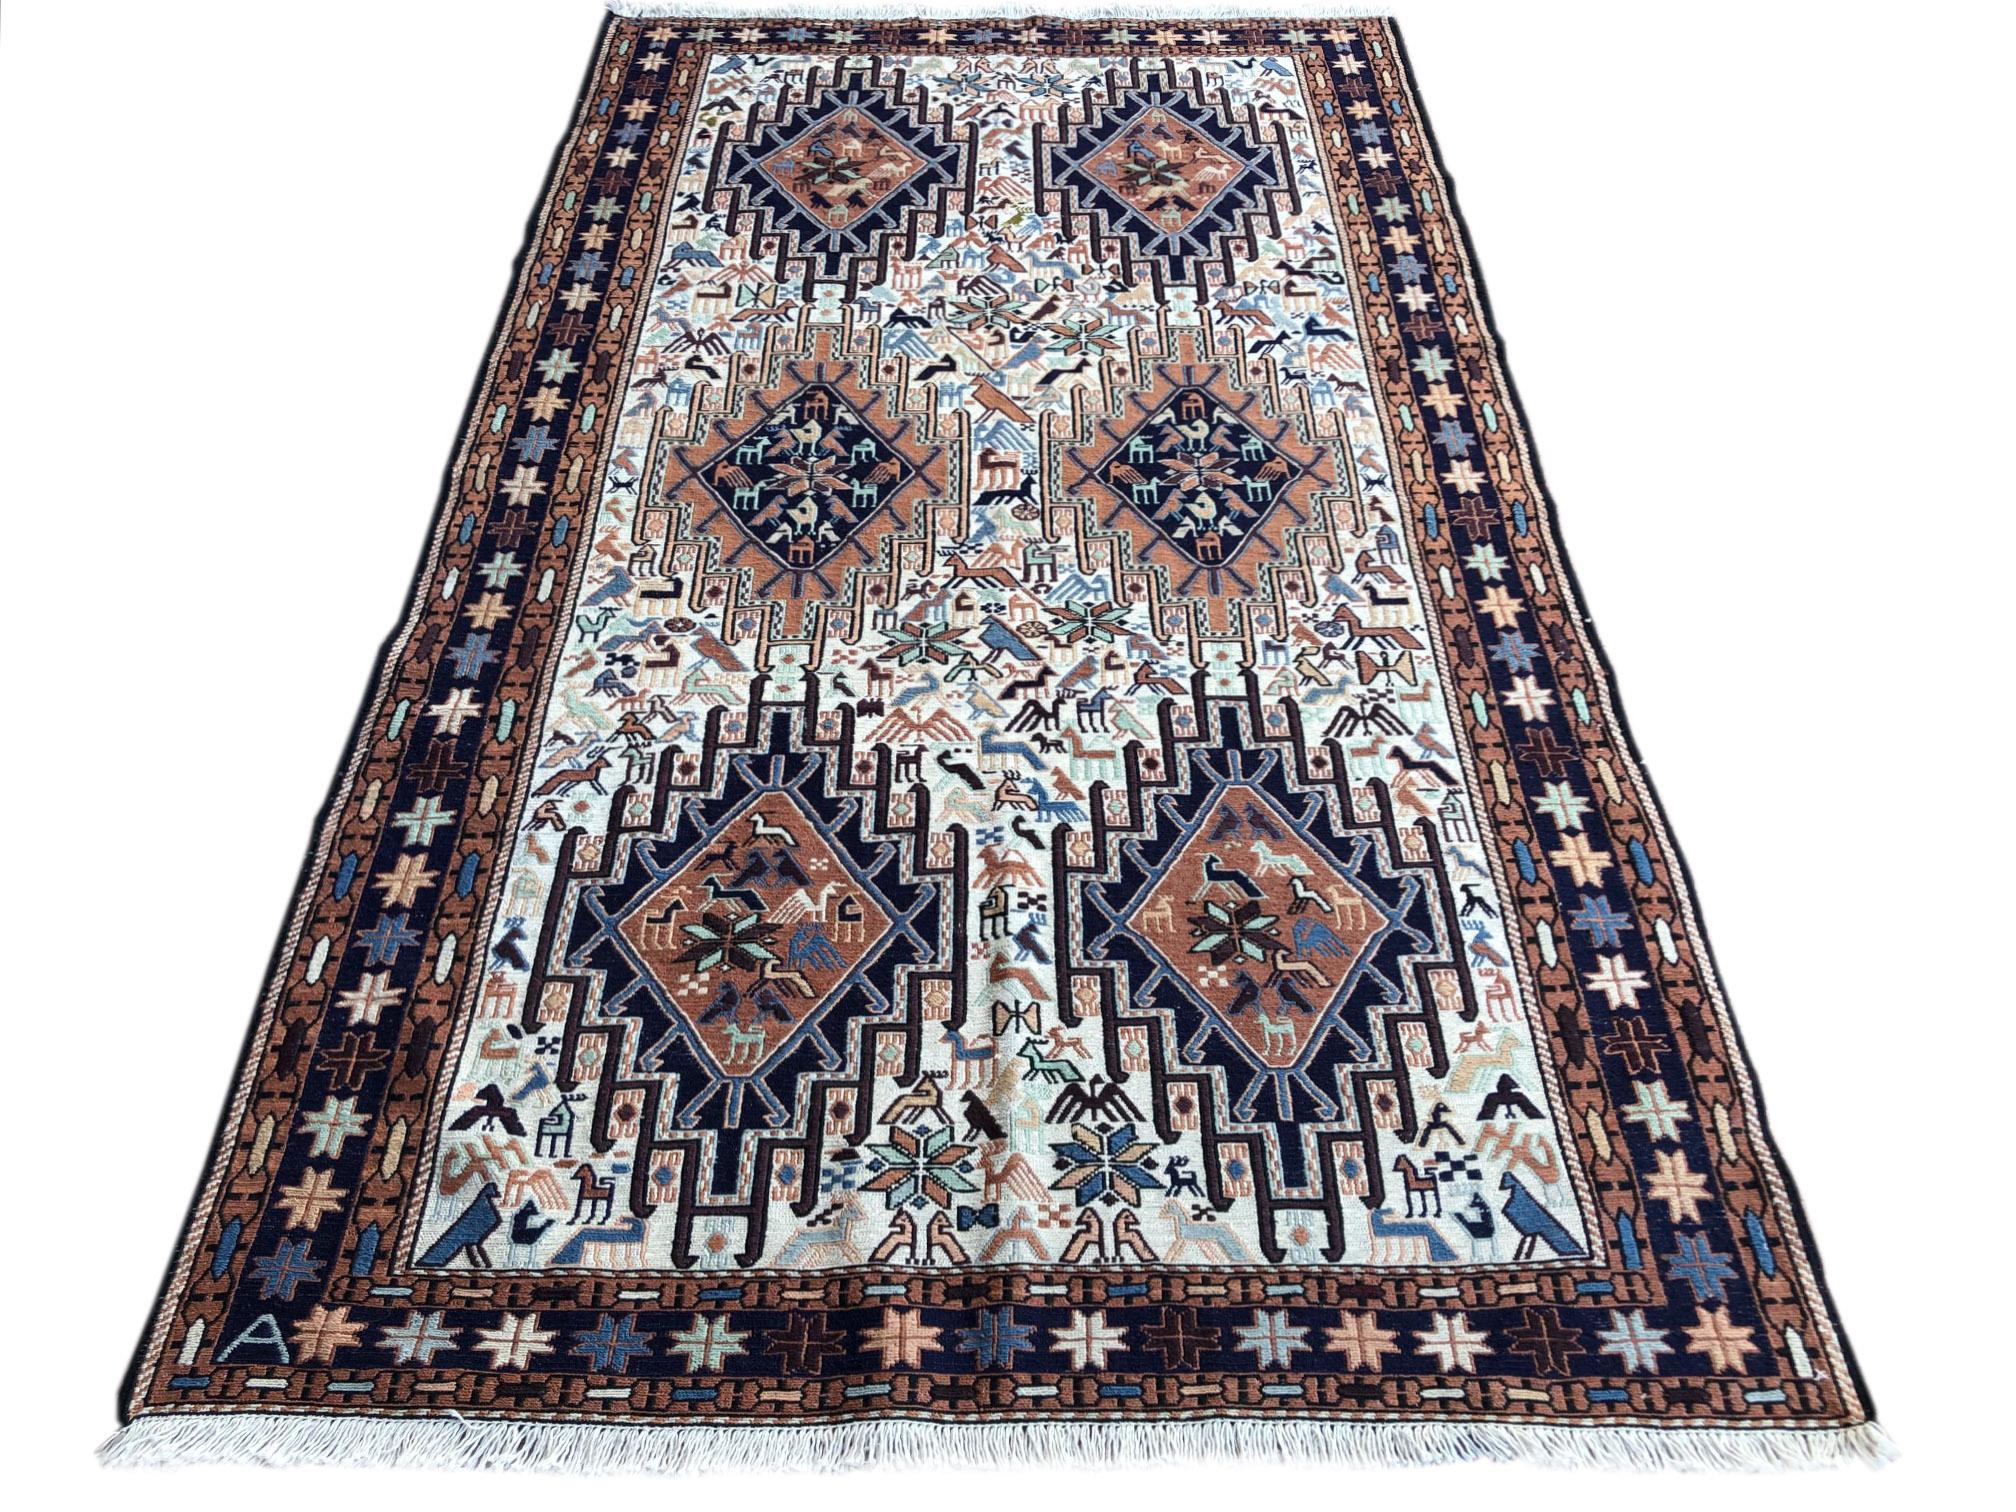 This rug is a Sumak rug which is a type of brocading or flat-woven pile. This is a flat-weave, rug that is thicker than the Kilim and very sturdy however they are not reversible like Kilims due to the non-clipped yarns are left on the back. The pile